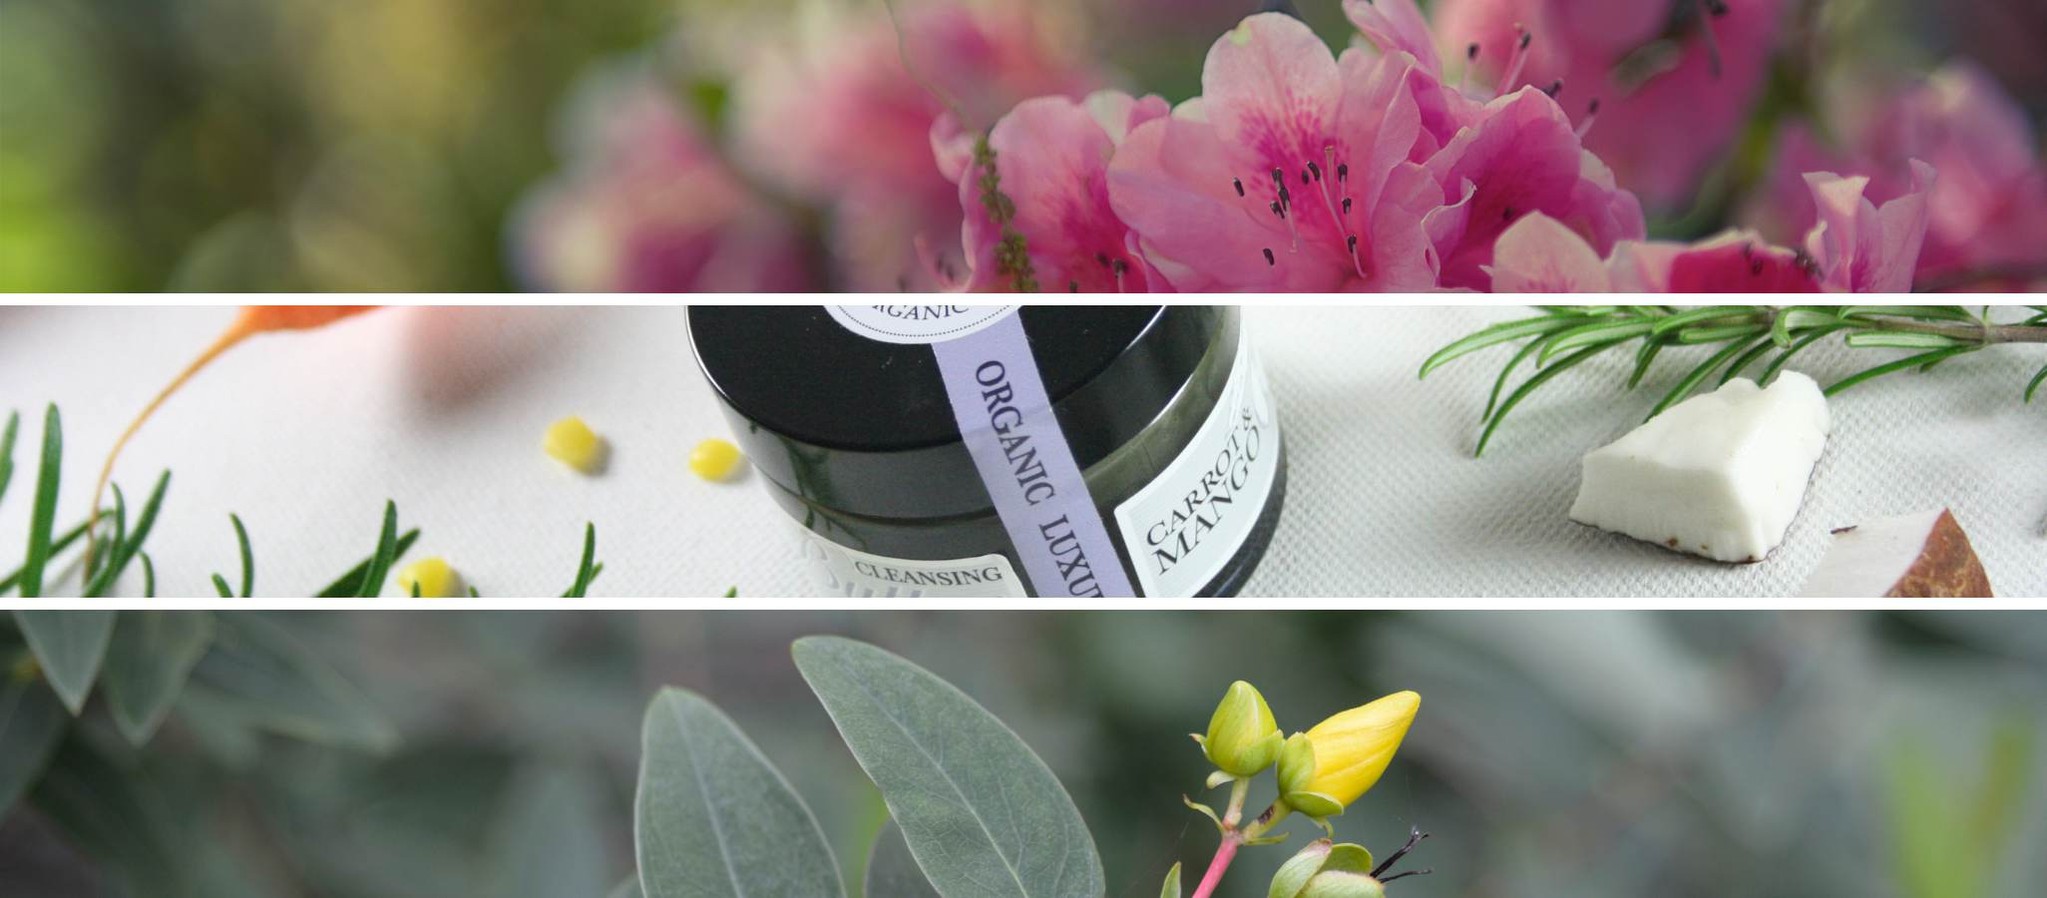 Cleansing Balms & Butters - The Ultimate Guide |The Rose Tree